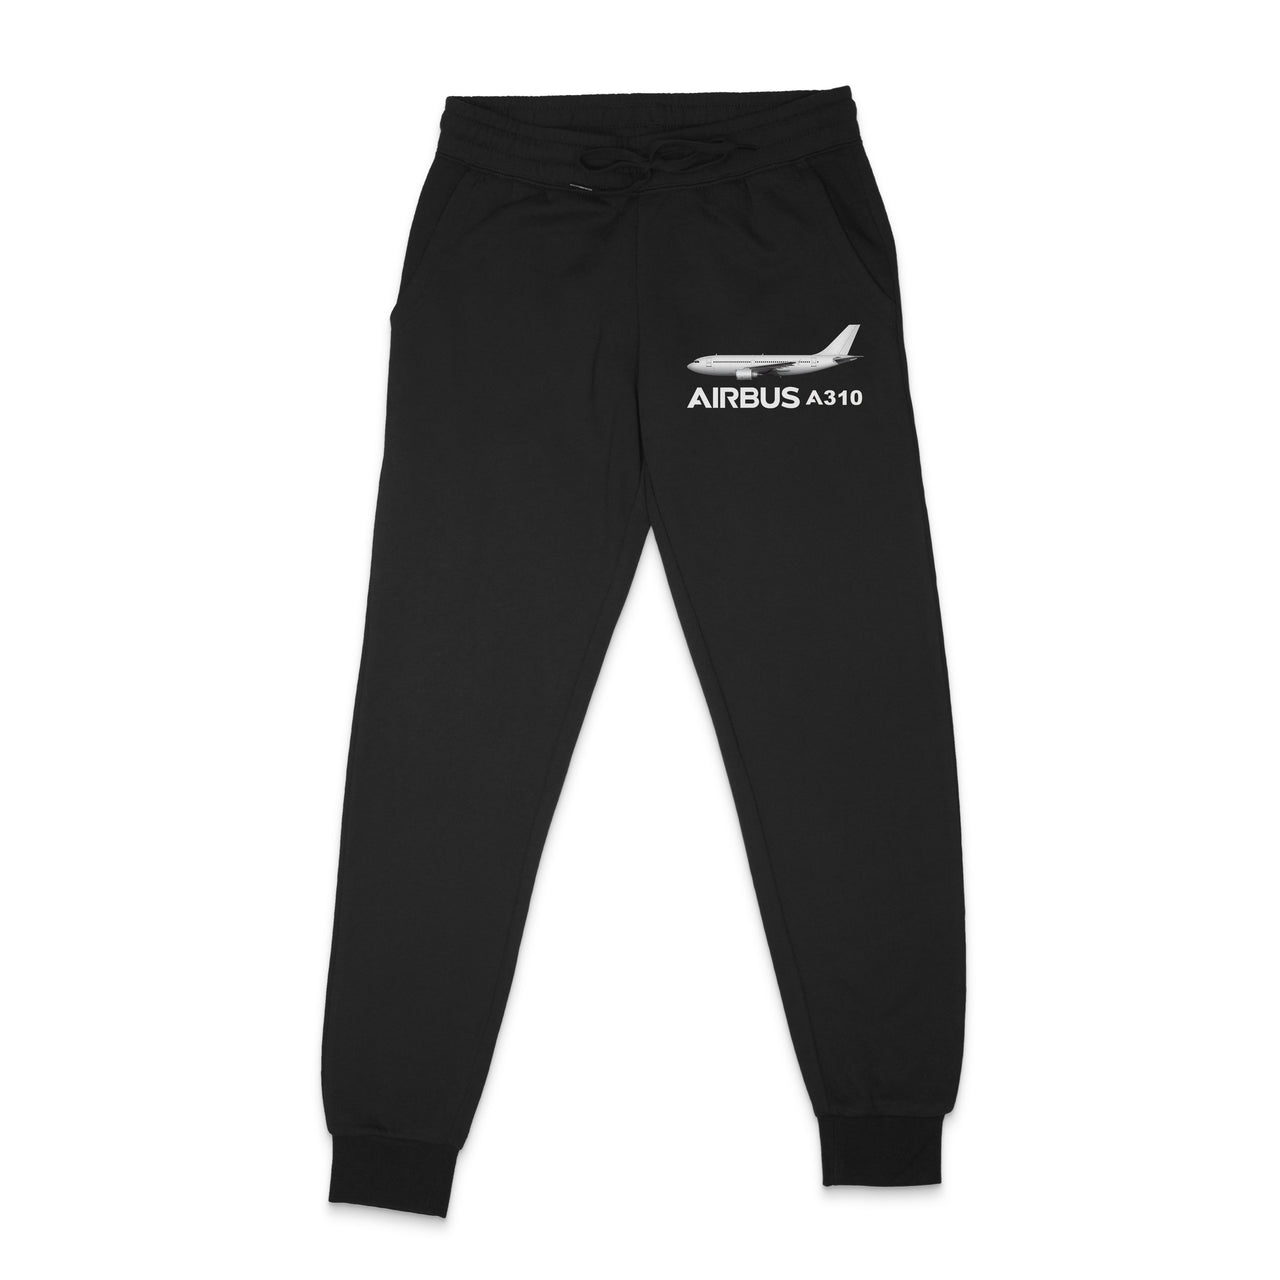 The Airbus A310 Designed Sweatpants